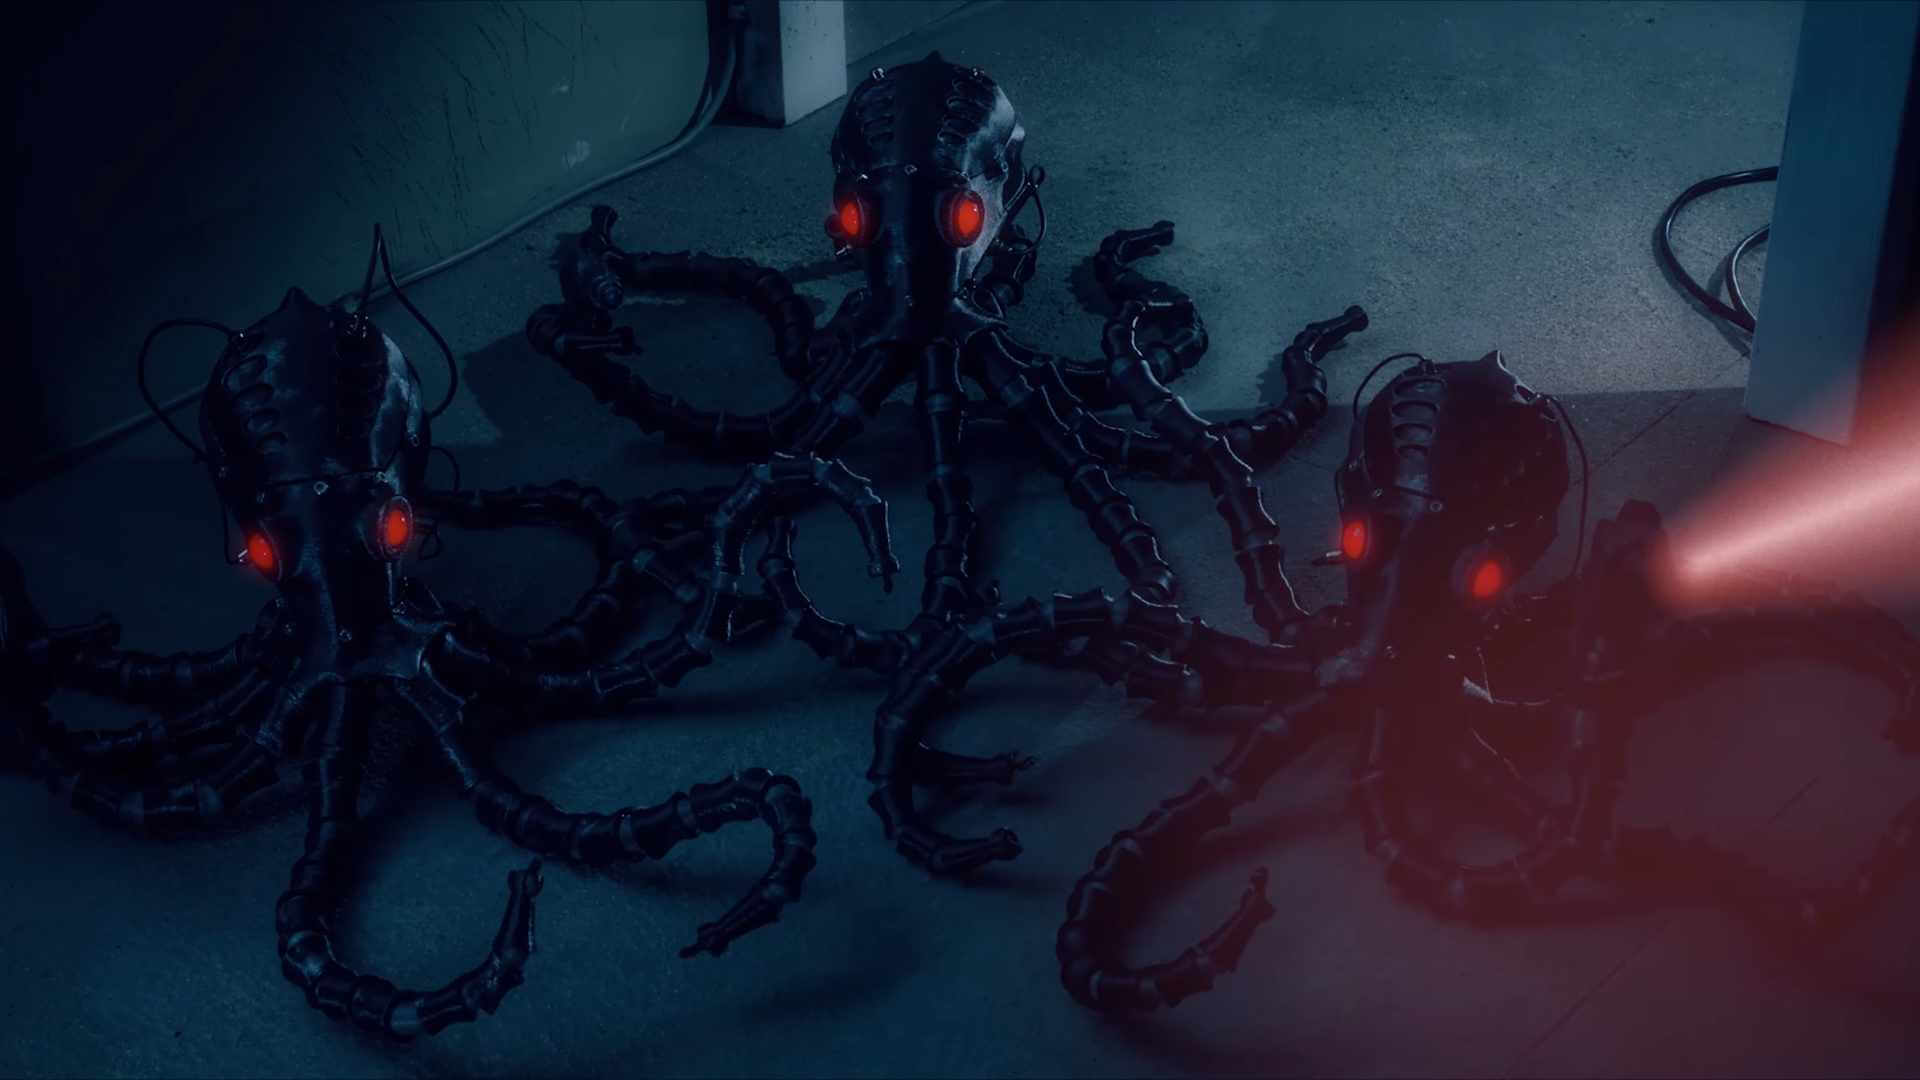 Attack of the Cyber Octopuses